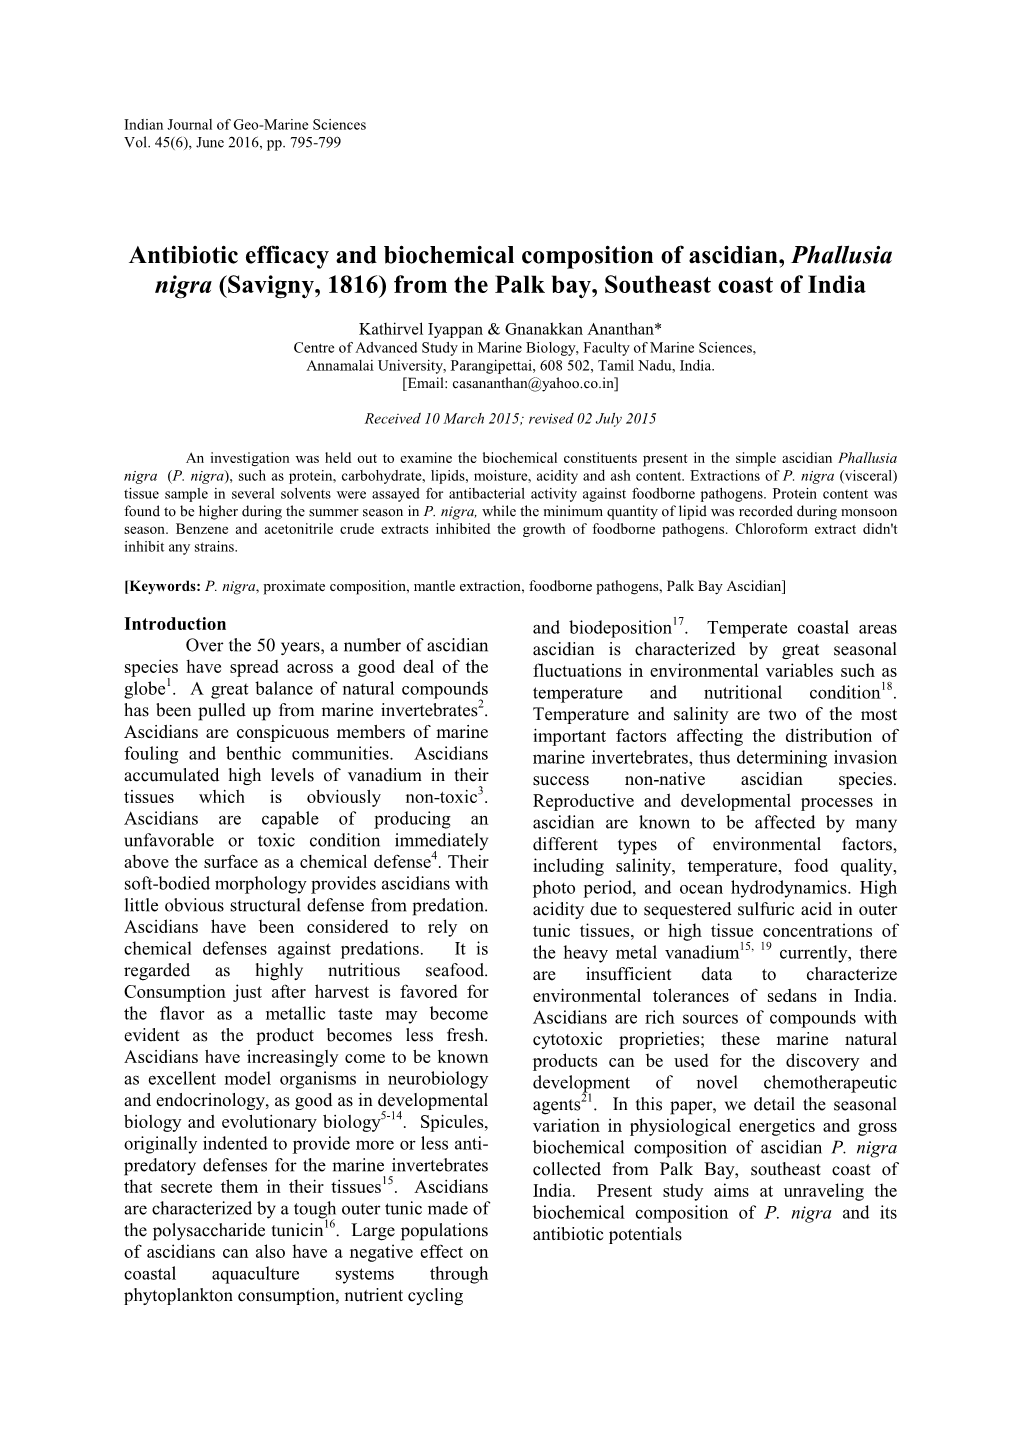 Antibiotic Efficacy and Biochemical Composition of Ascidian, Phallusia Nigra (Savigny, 1816) from the Palk Bay, Southeast Coast of India